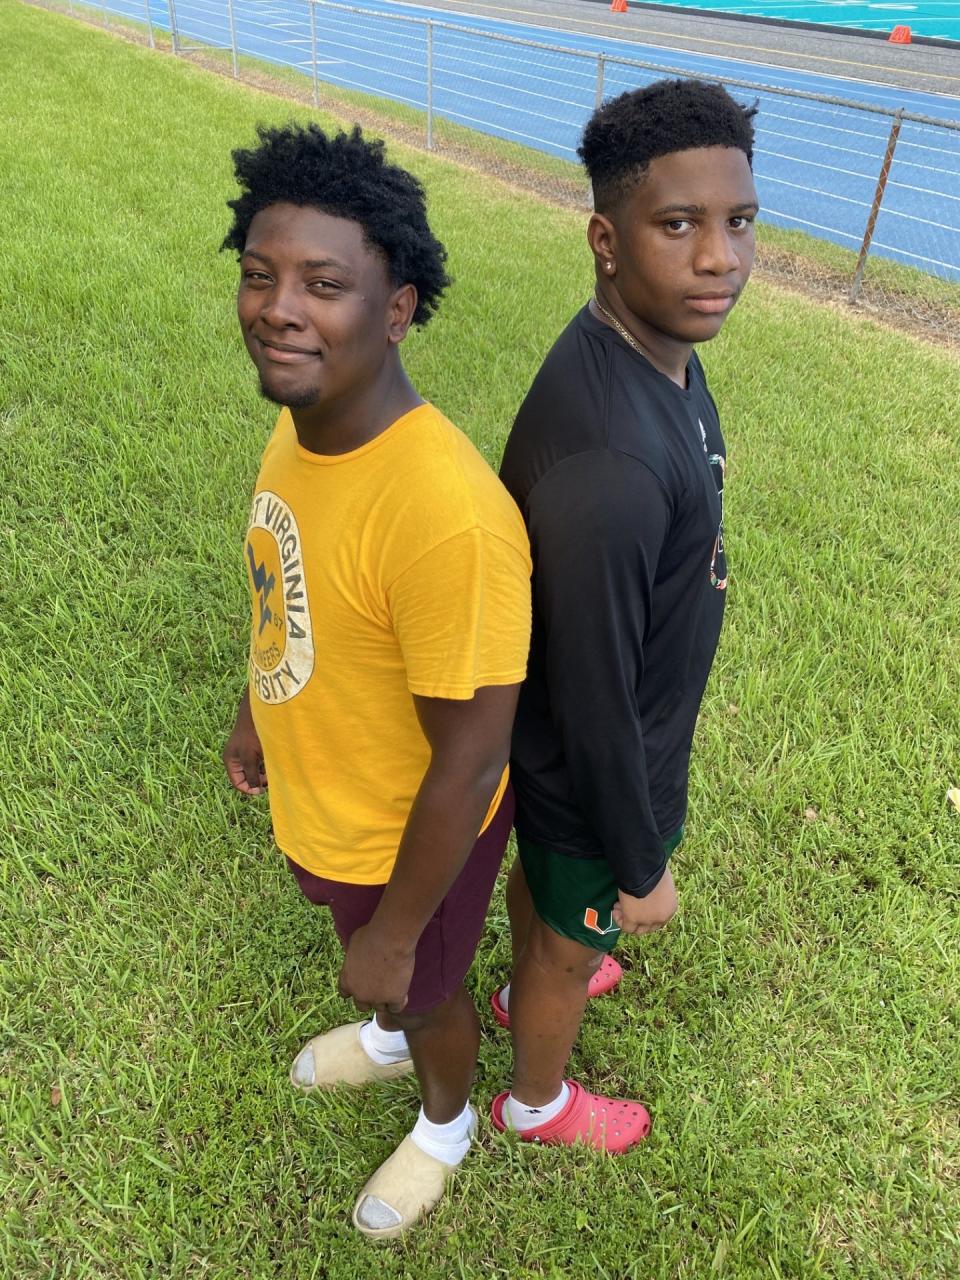 Elijah Kinsler (left) and Jermaine Kinsler are cousins on the Bergen Catholic football team. Jermaine moved to New Jersey from Ocala, Florida.